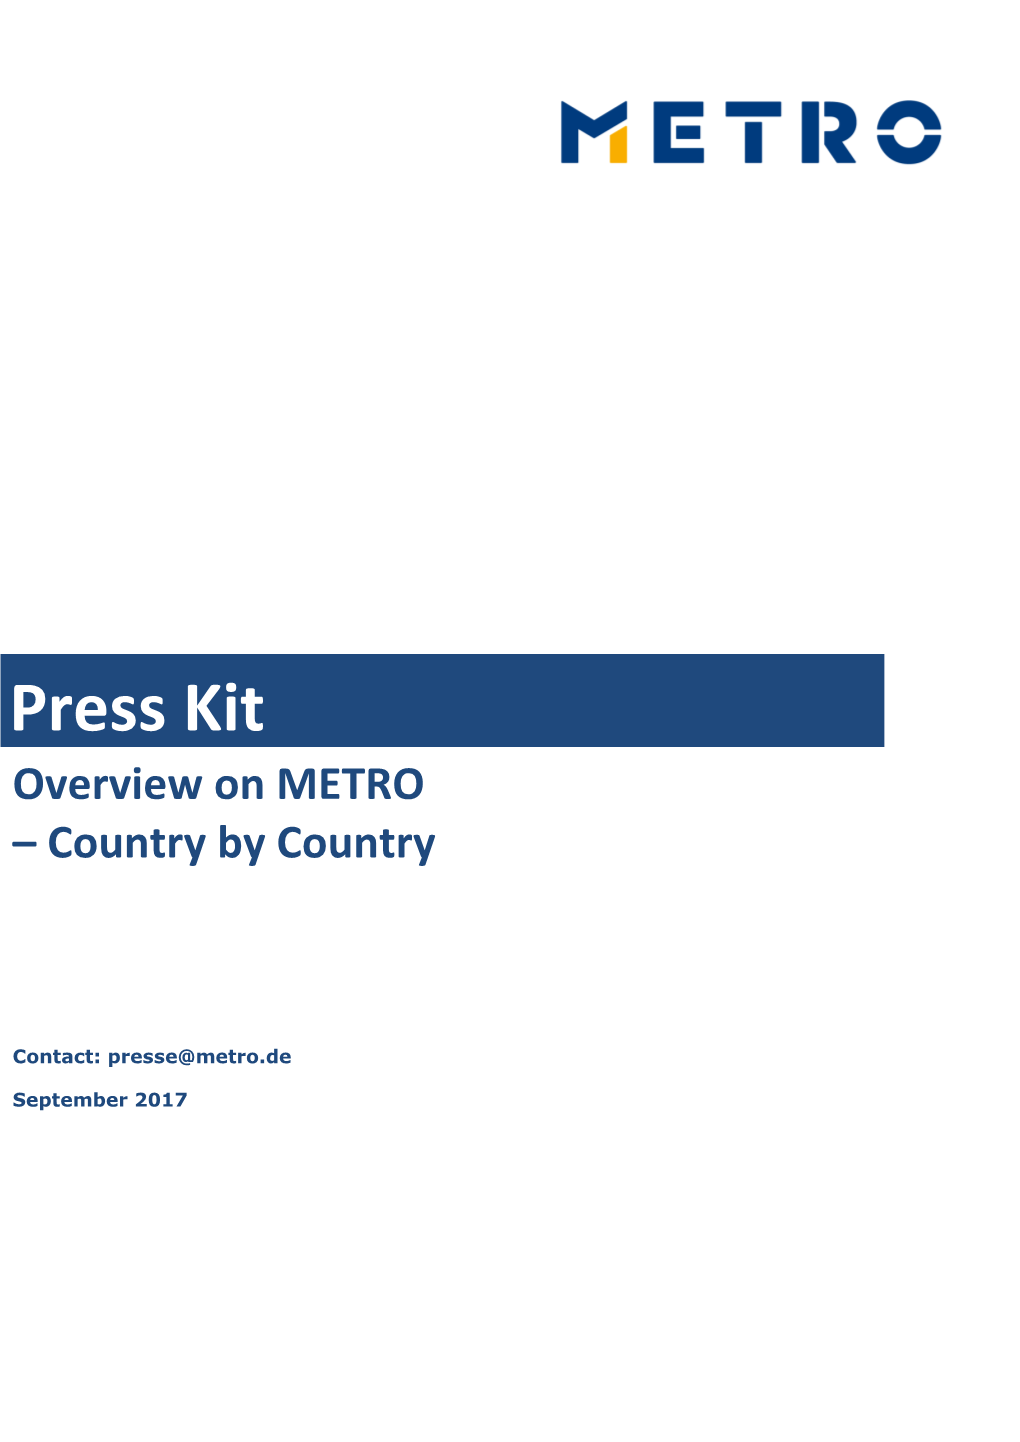 Overview on METRO – Country by Country